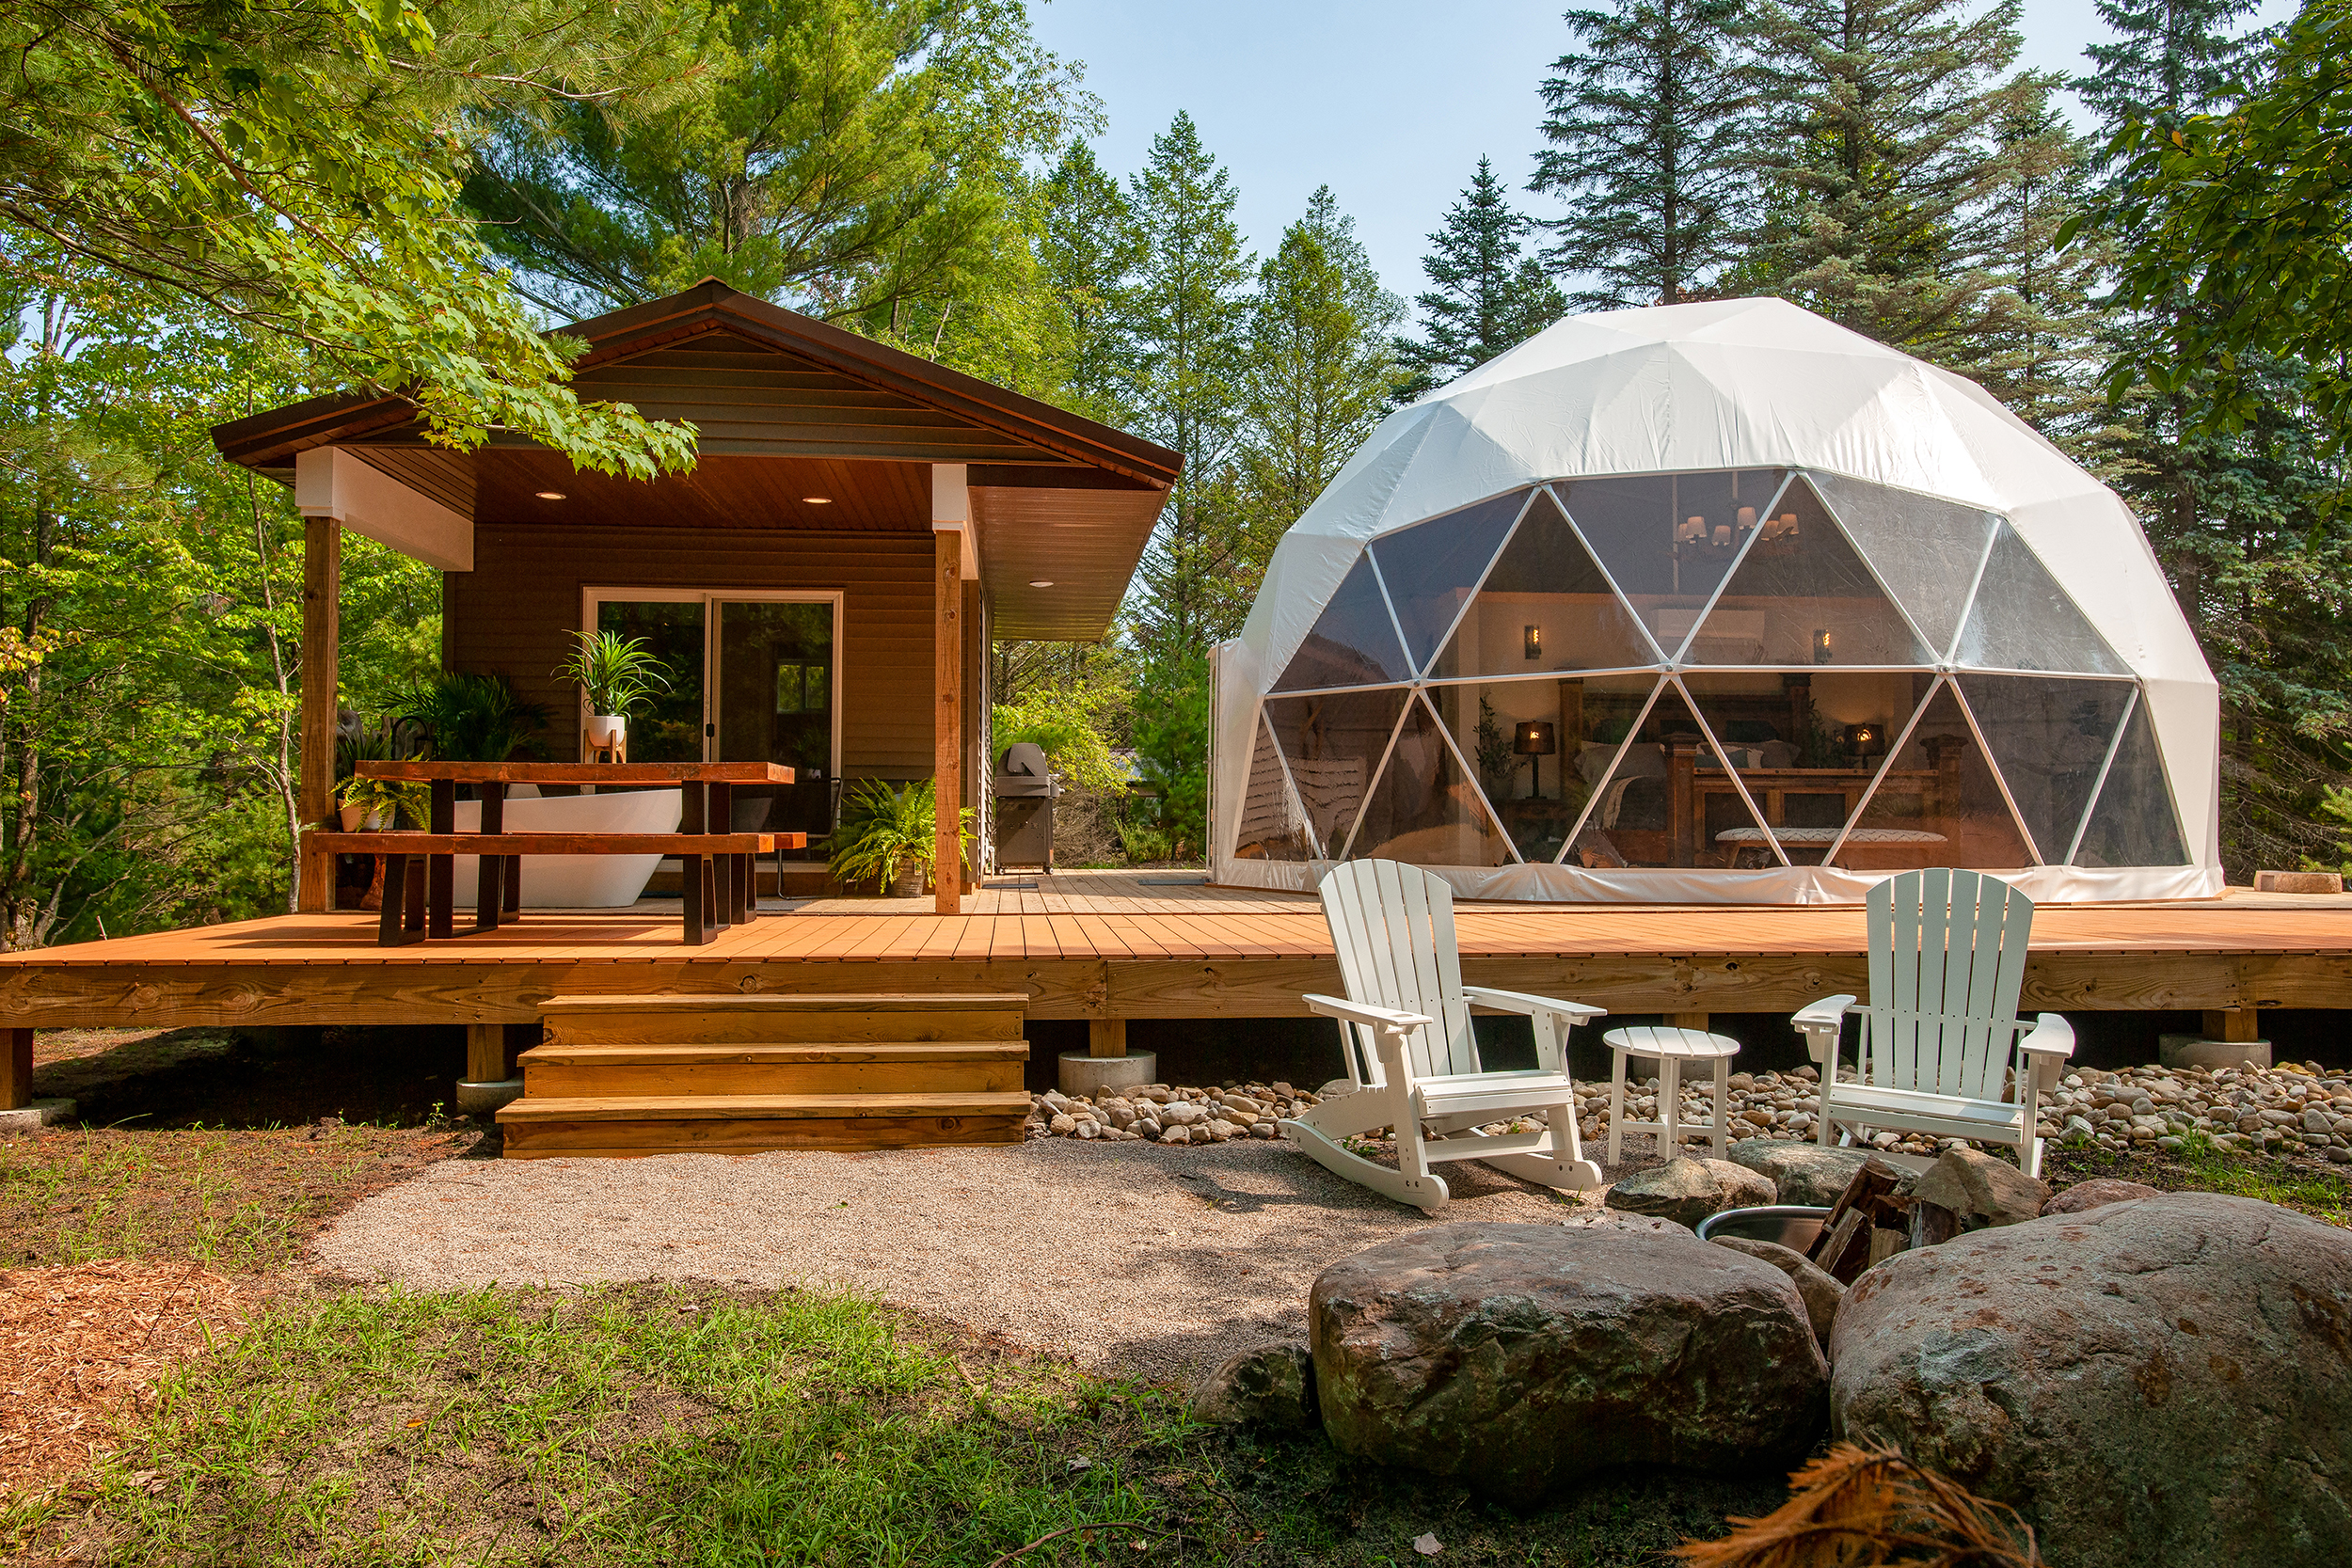 Silver Birch Resort Offers Unique, Luxurious Dome Camping Experience